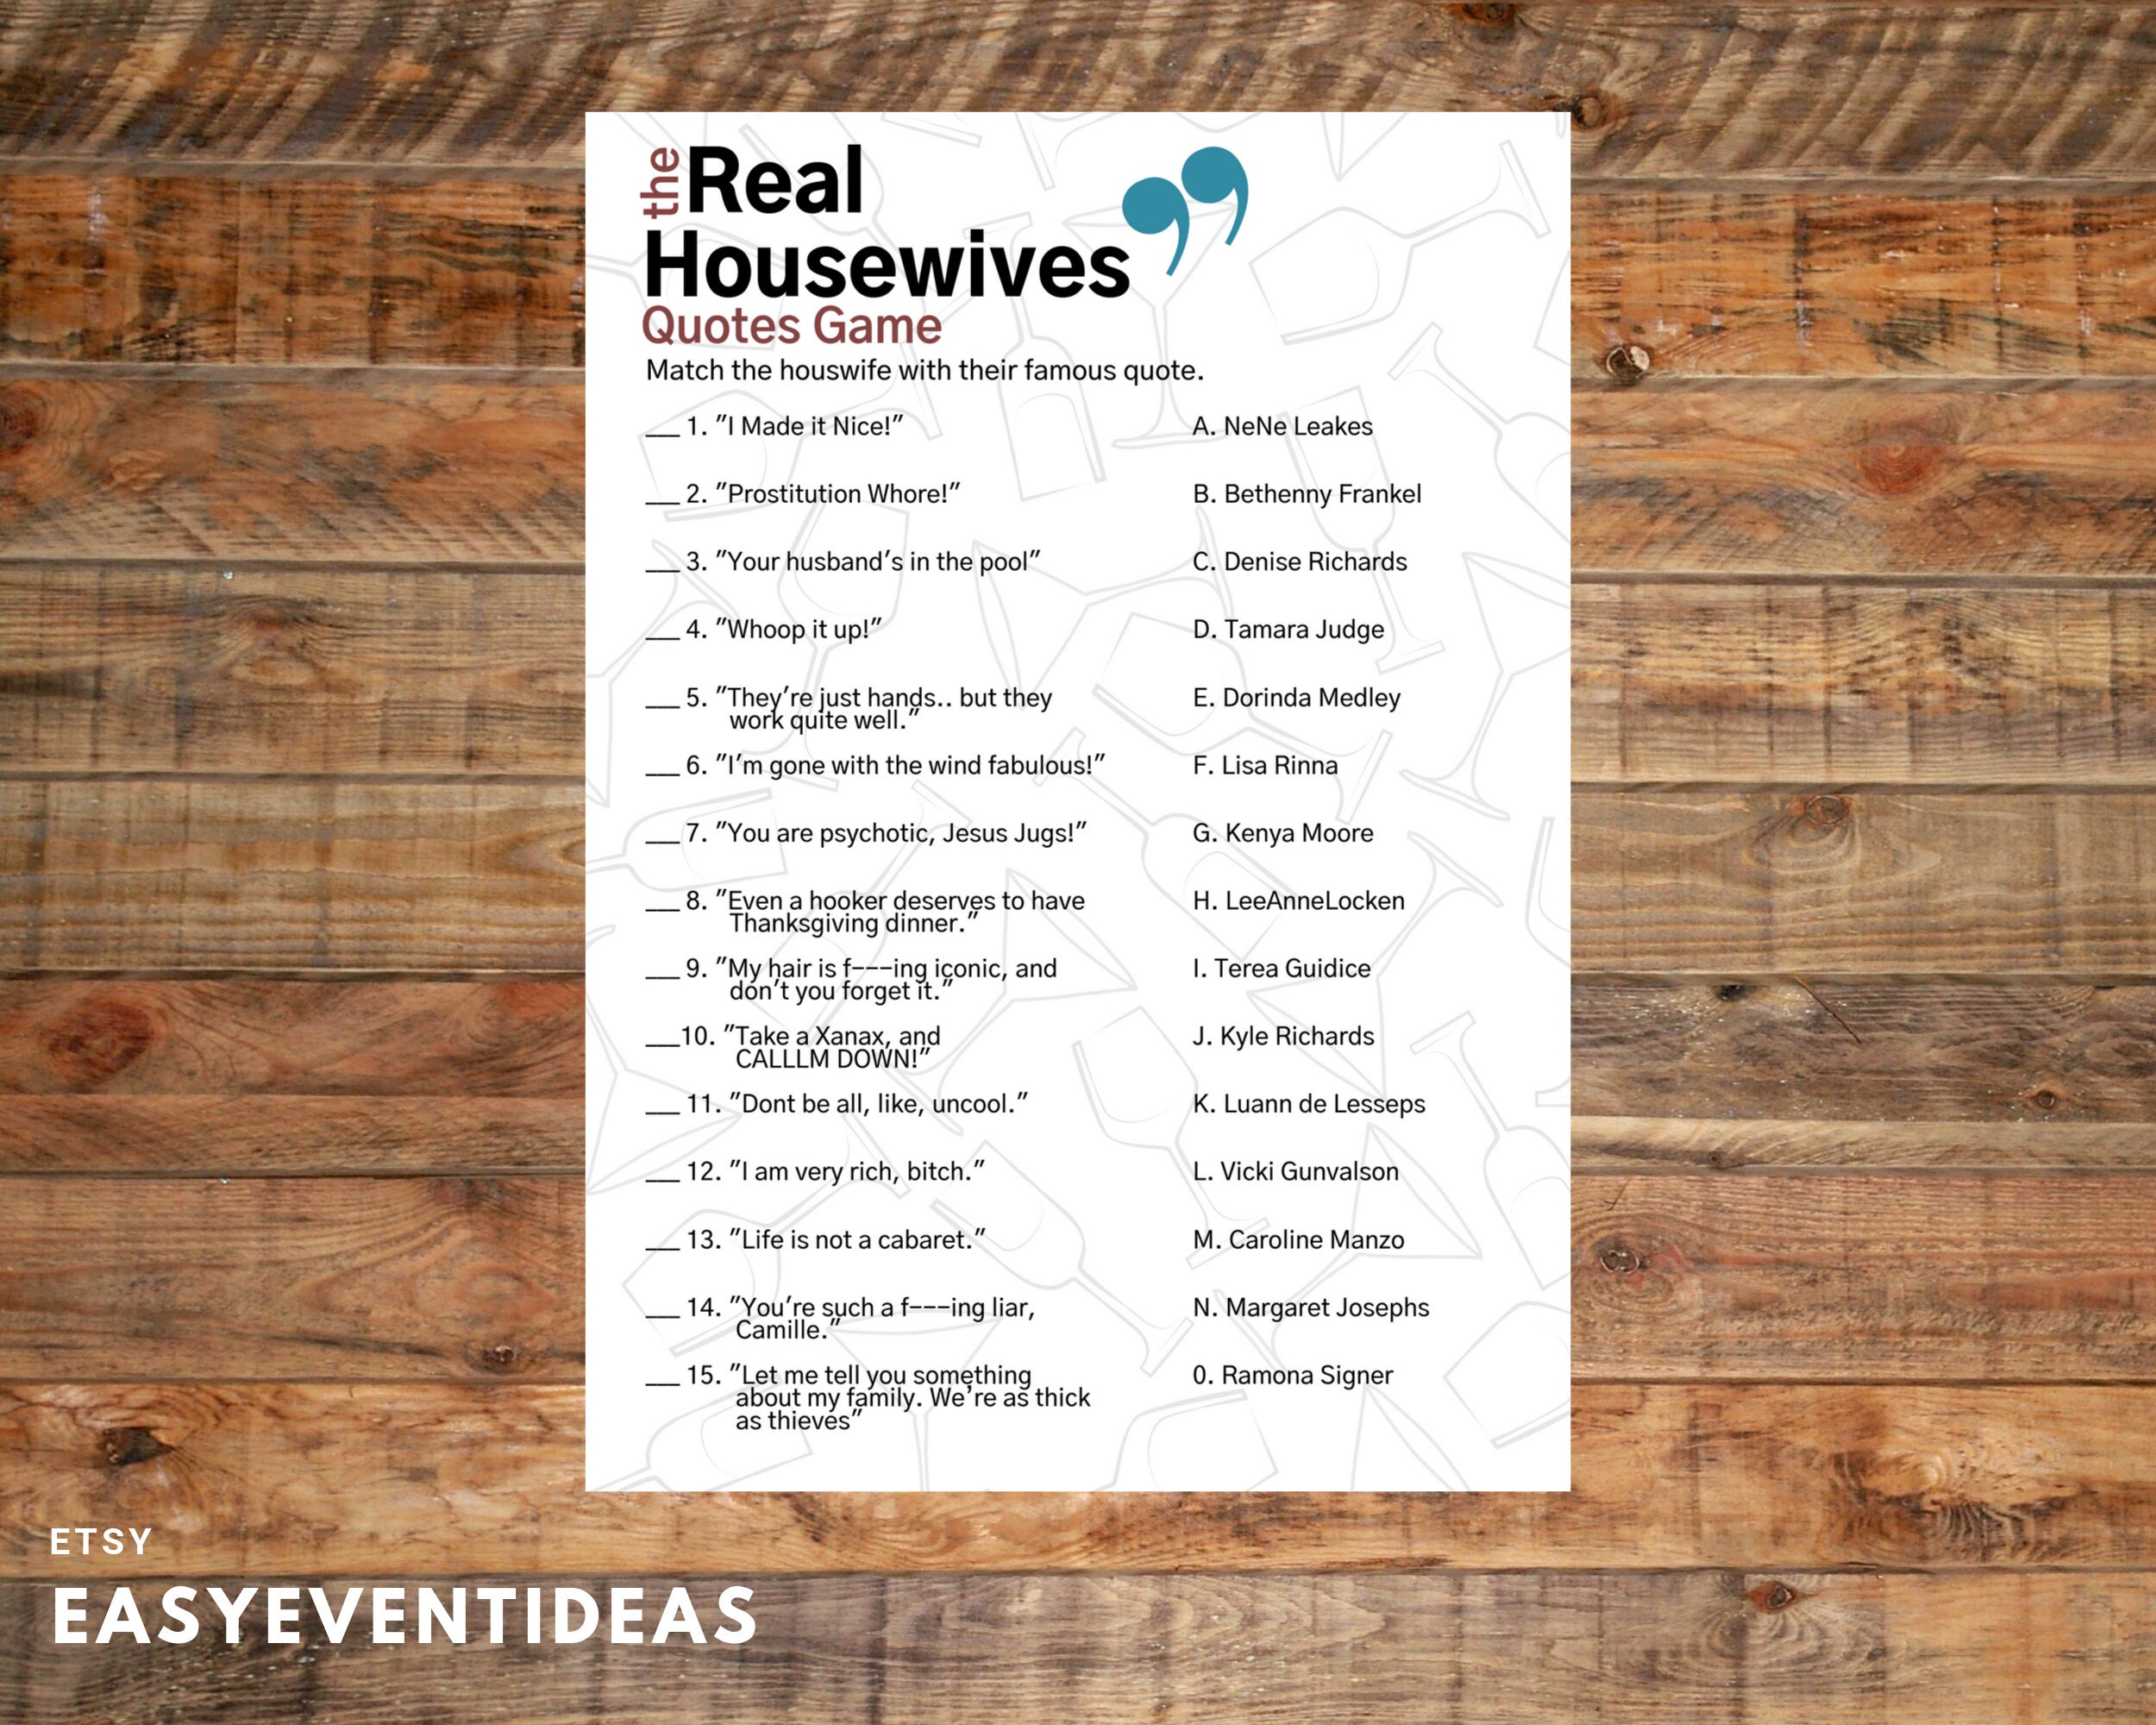 The Real Housewives Quotes Game Housewives Quotes Quiz image